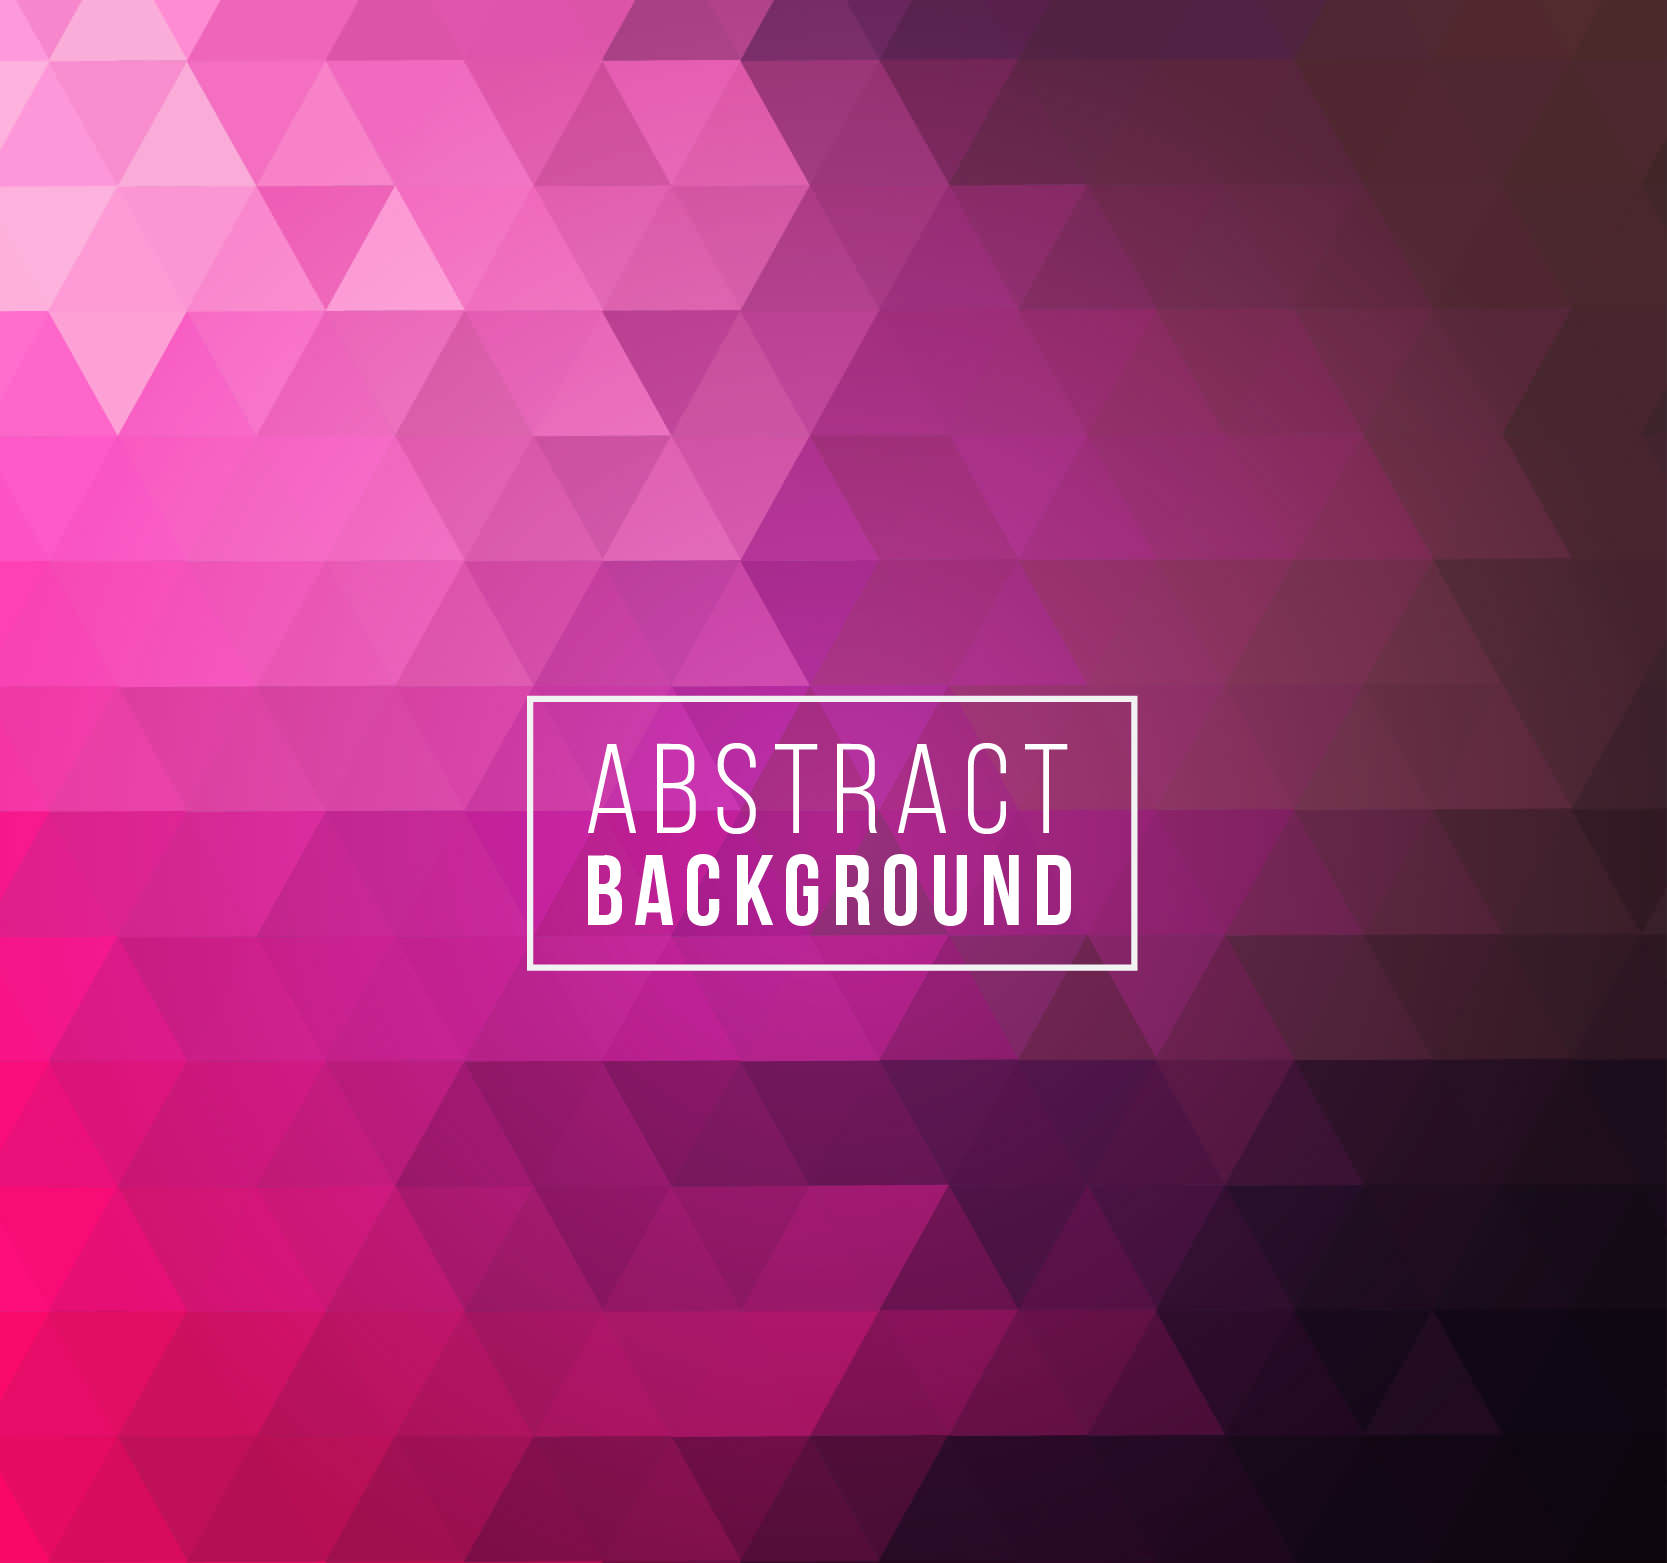 Abstract Polygon Background in Pink Tones